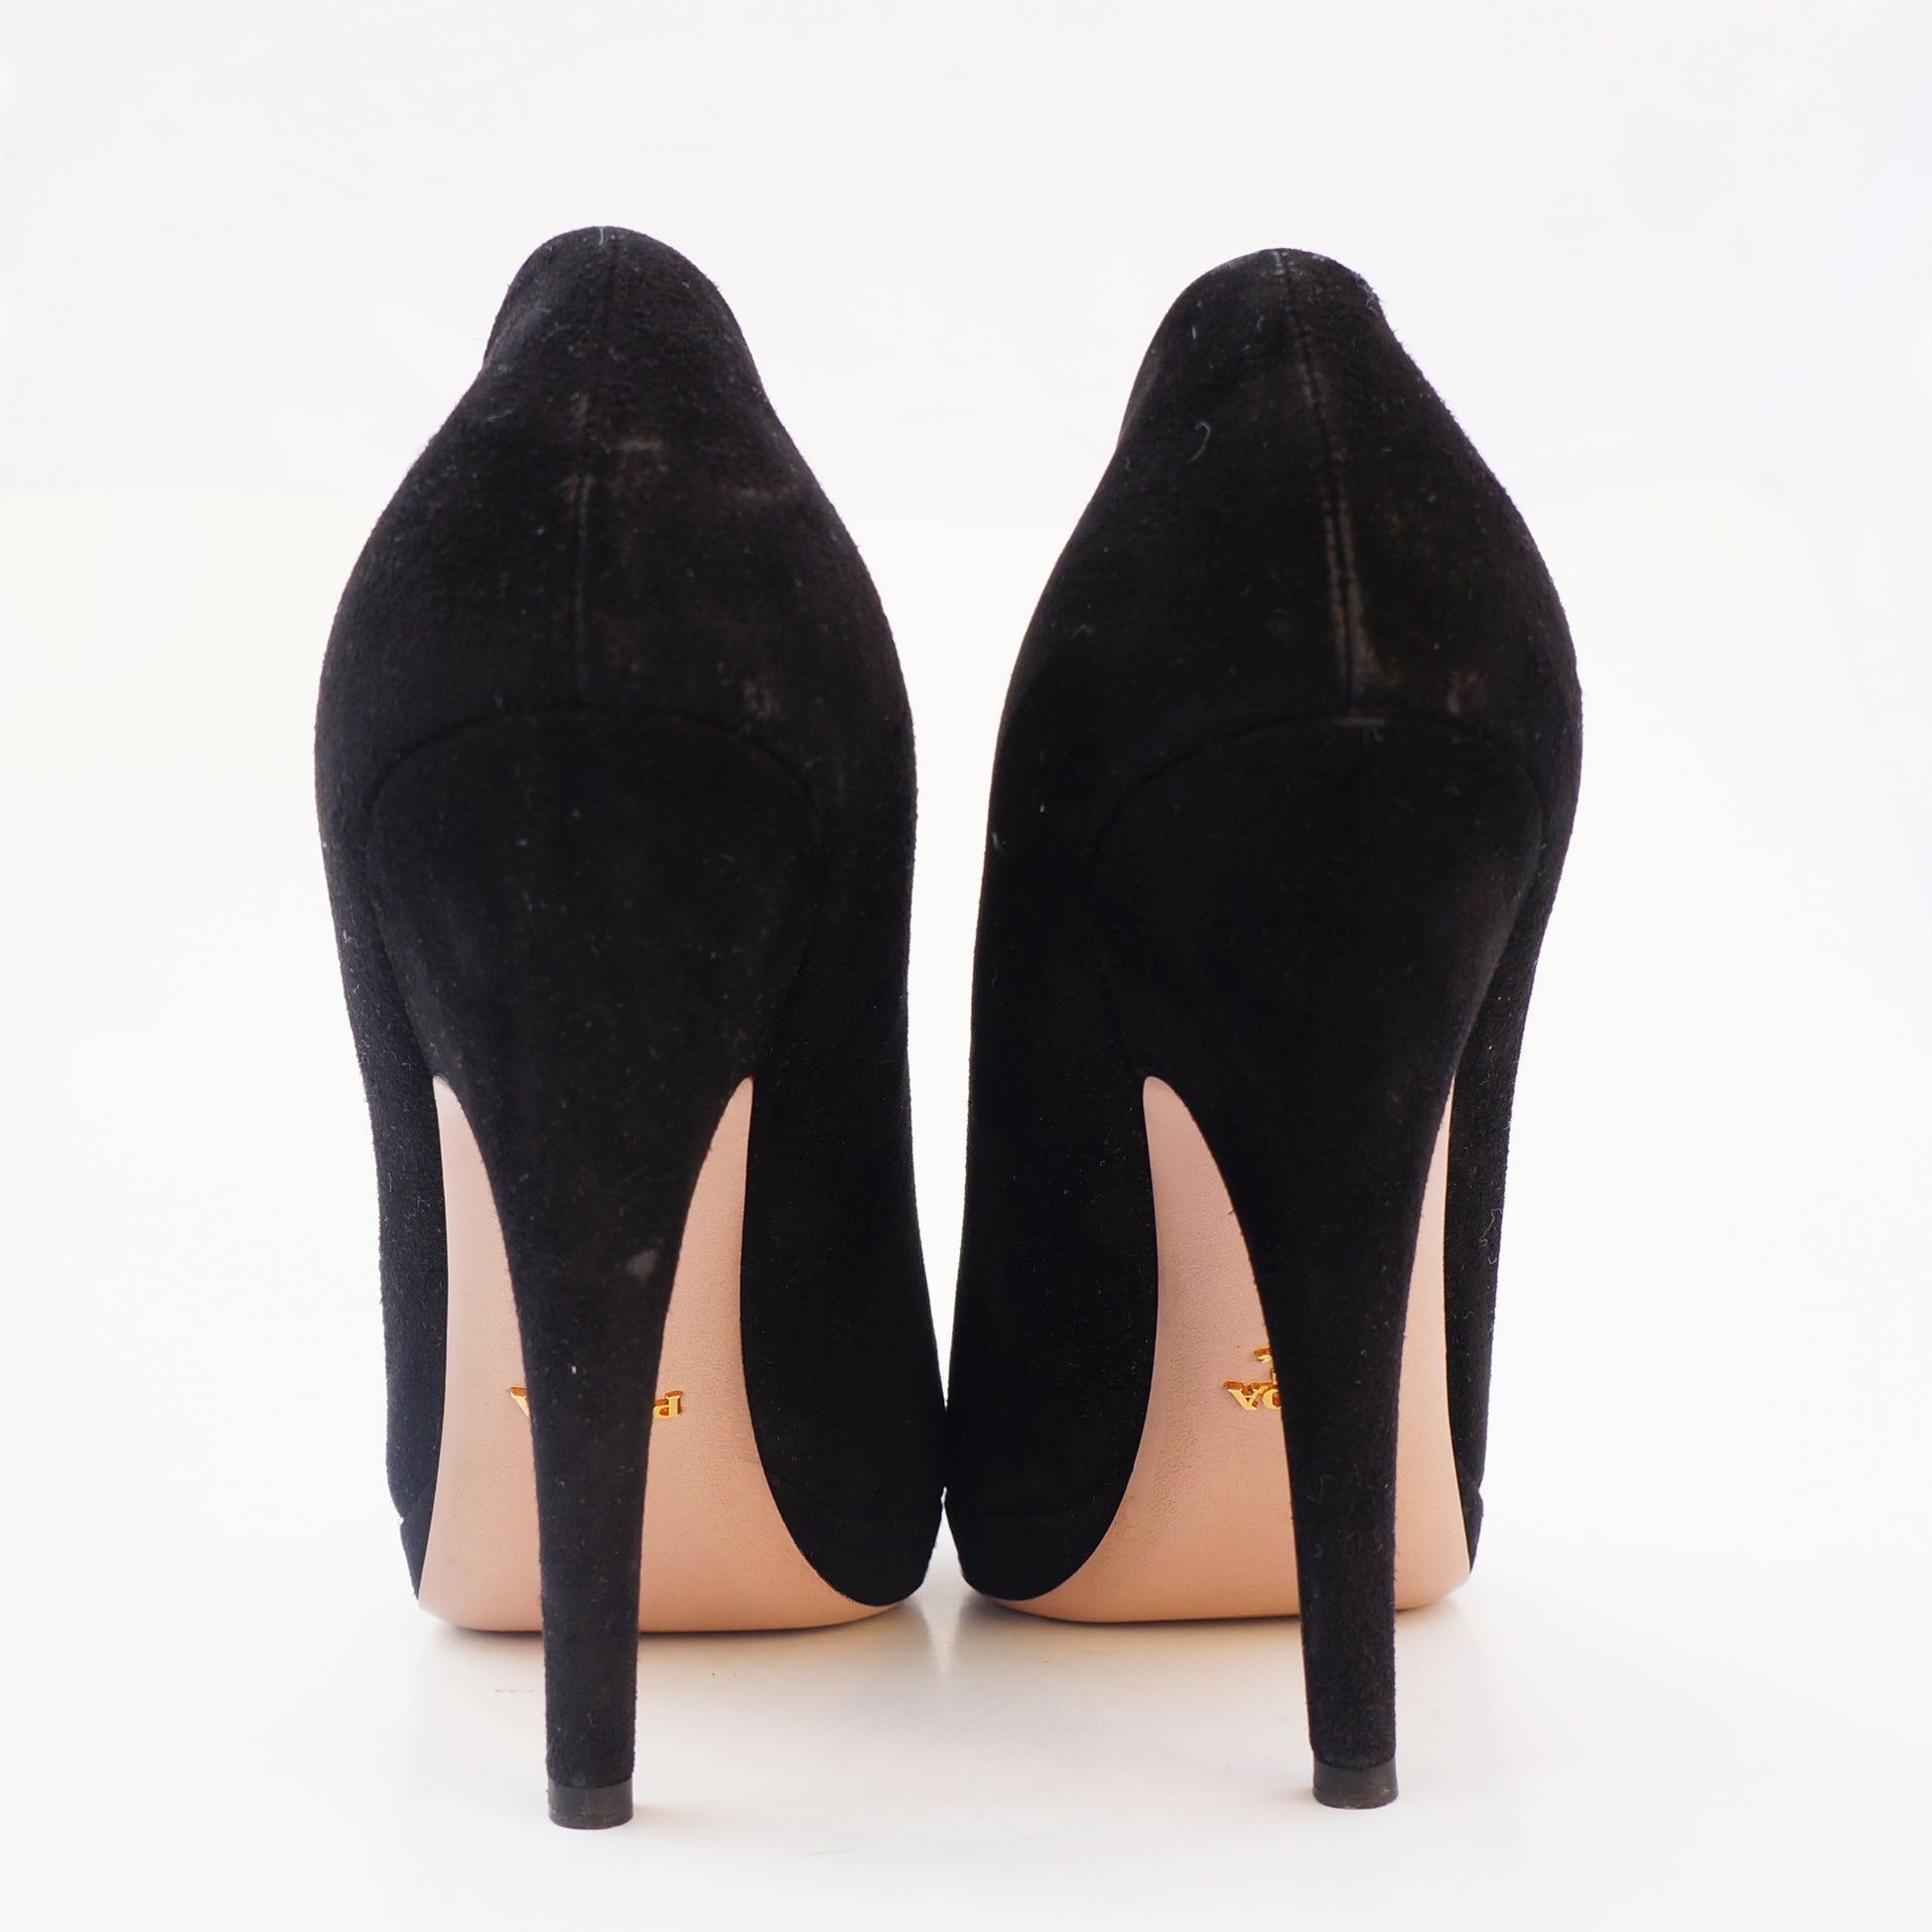 PRADA SUEDE ROUNDED POINTED-TOE BOOT PUMPS - leefluxury.com